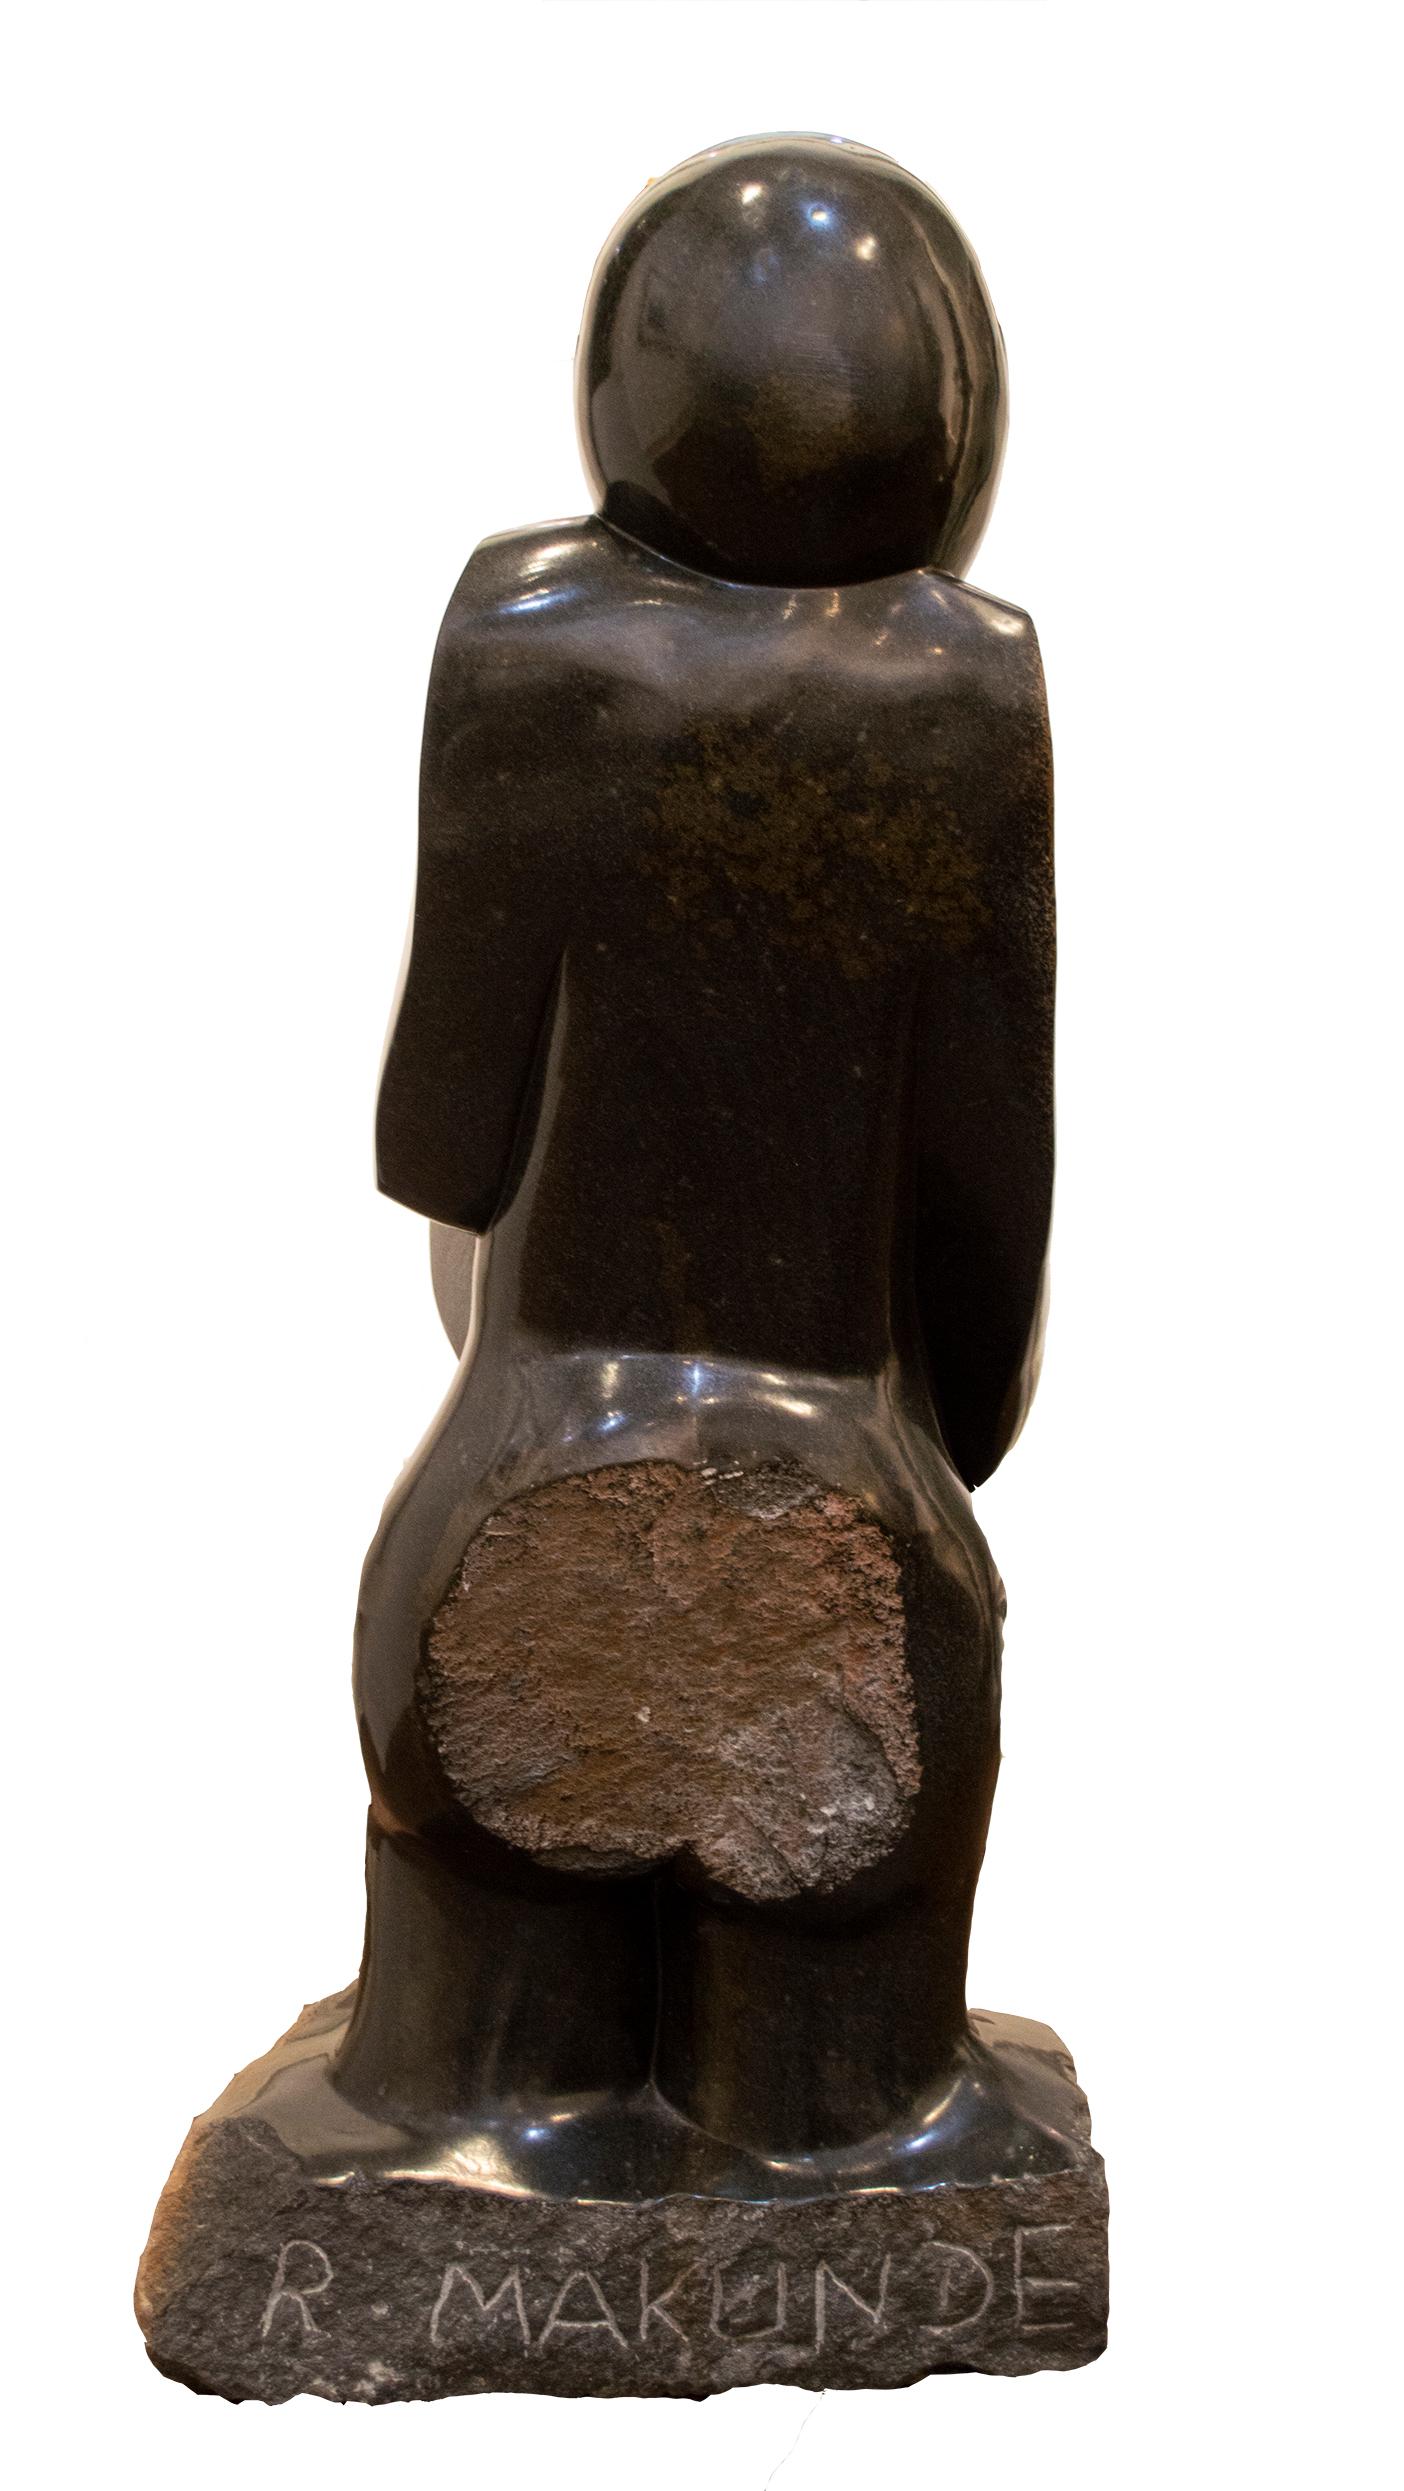 'Famine' is an original springstone sculpture signed by the Zimbabwean artist Rangarirai Makunde. The sculpture presents a solitary figure who stands facing directly forward. He holds a bowl in his hands, showing the viewer the emptiness it